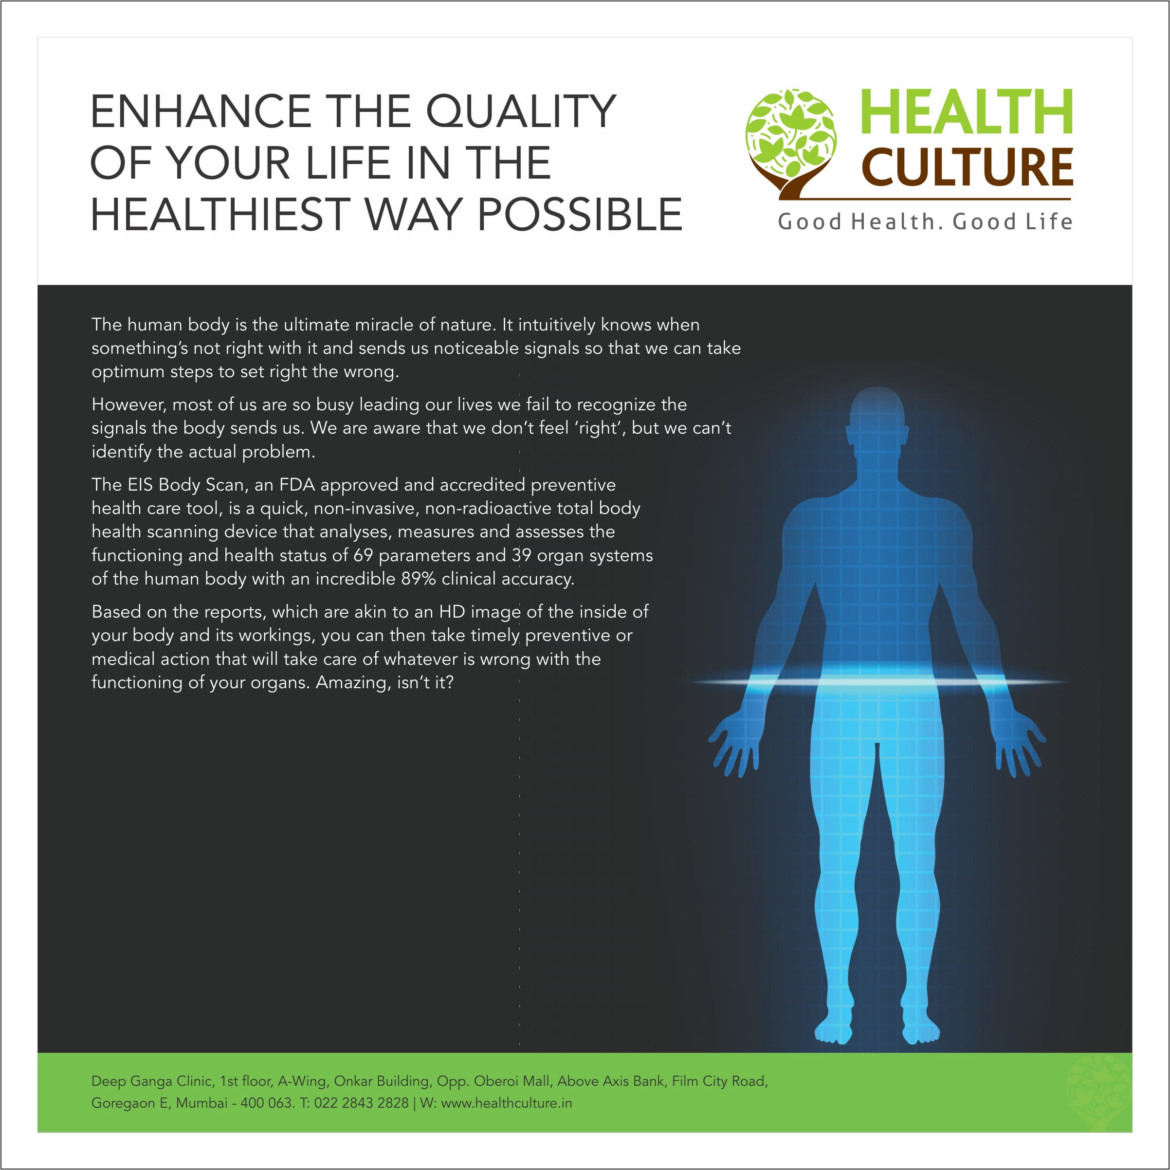 Enhance the Quality of life - Health Culture